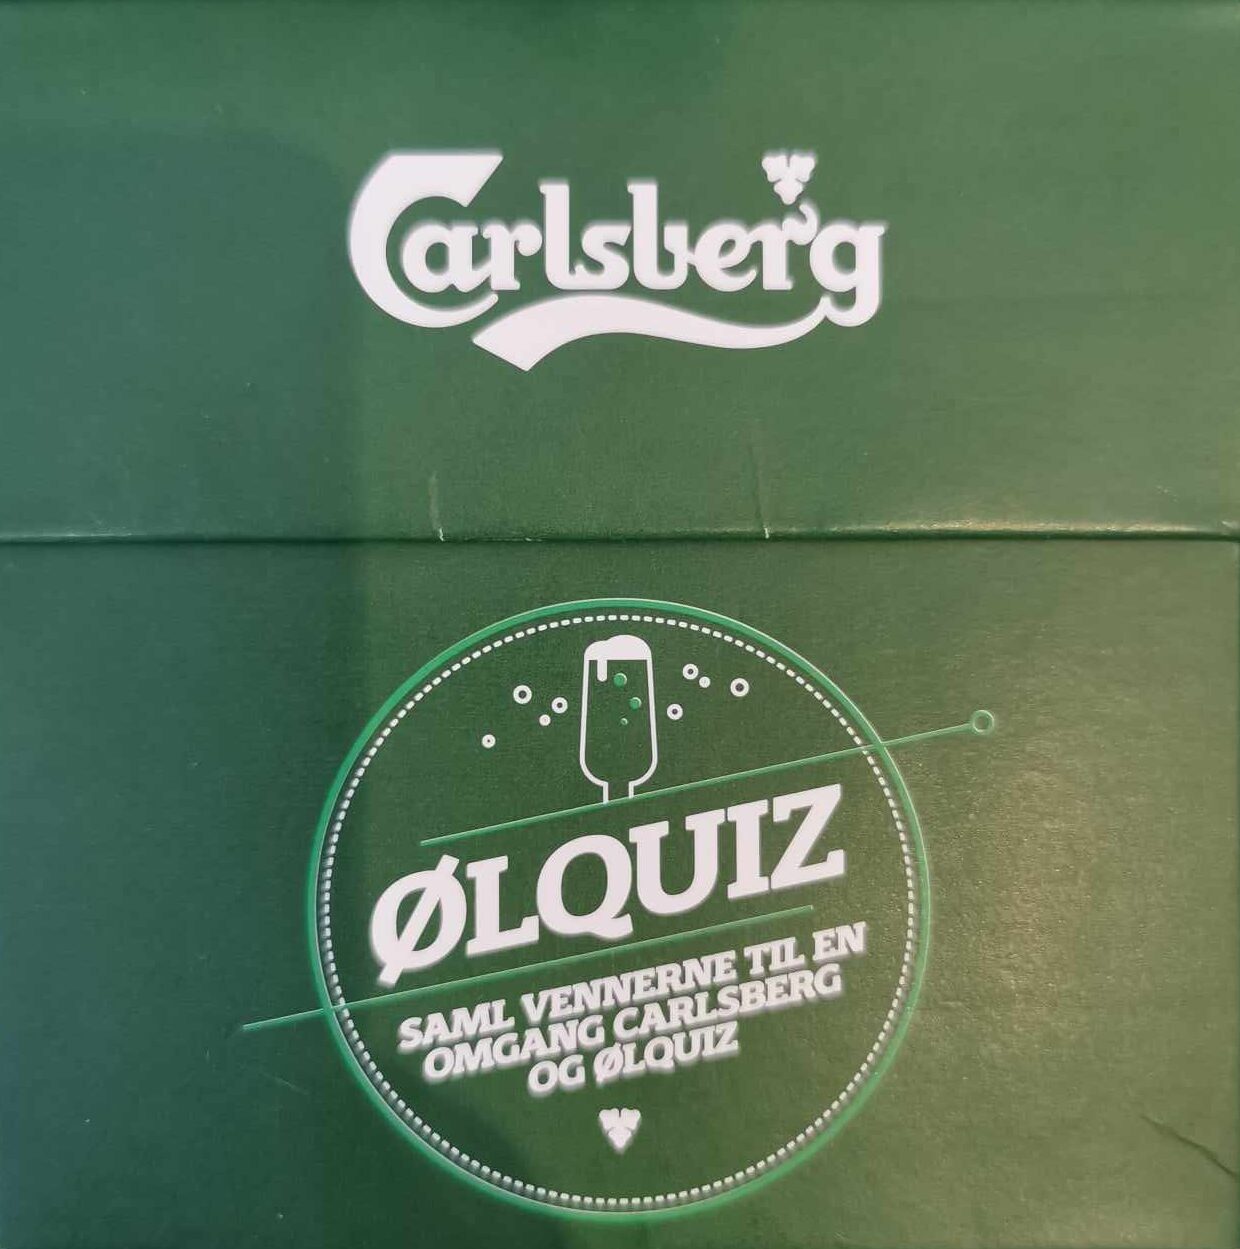 Read more about the article Carlsberg: Ølquiz